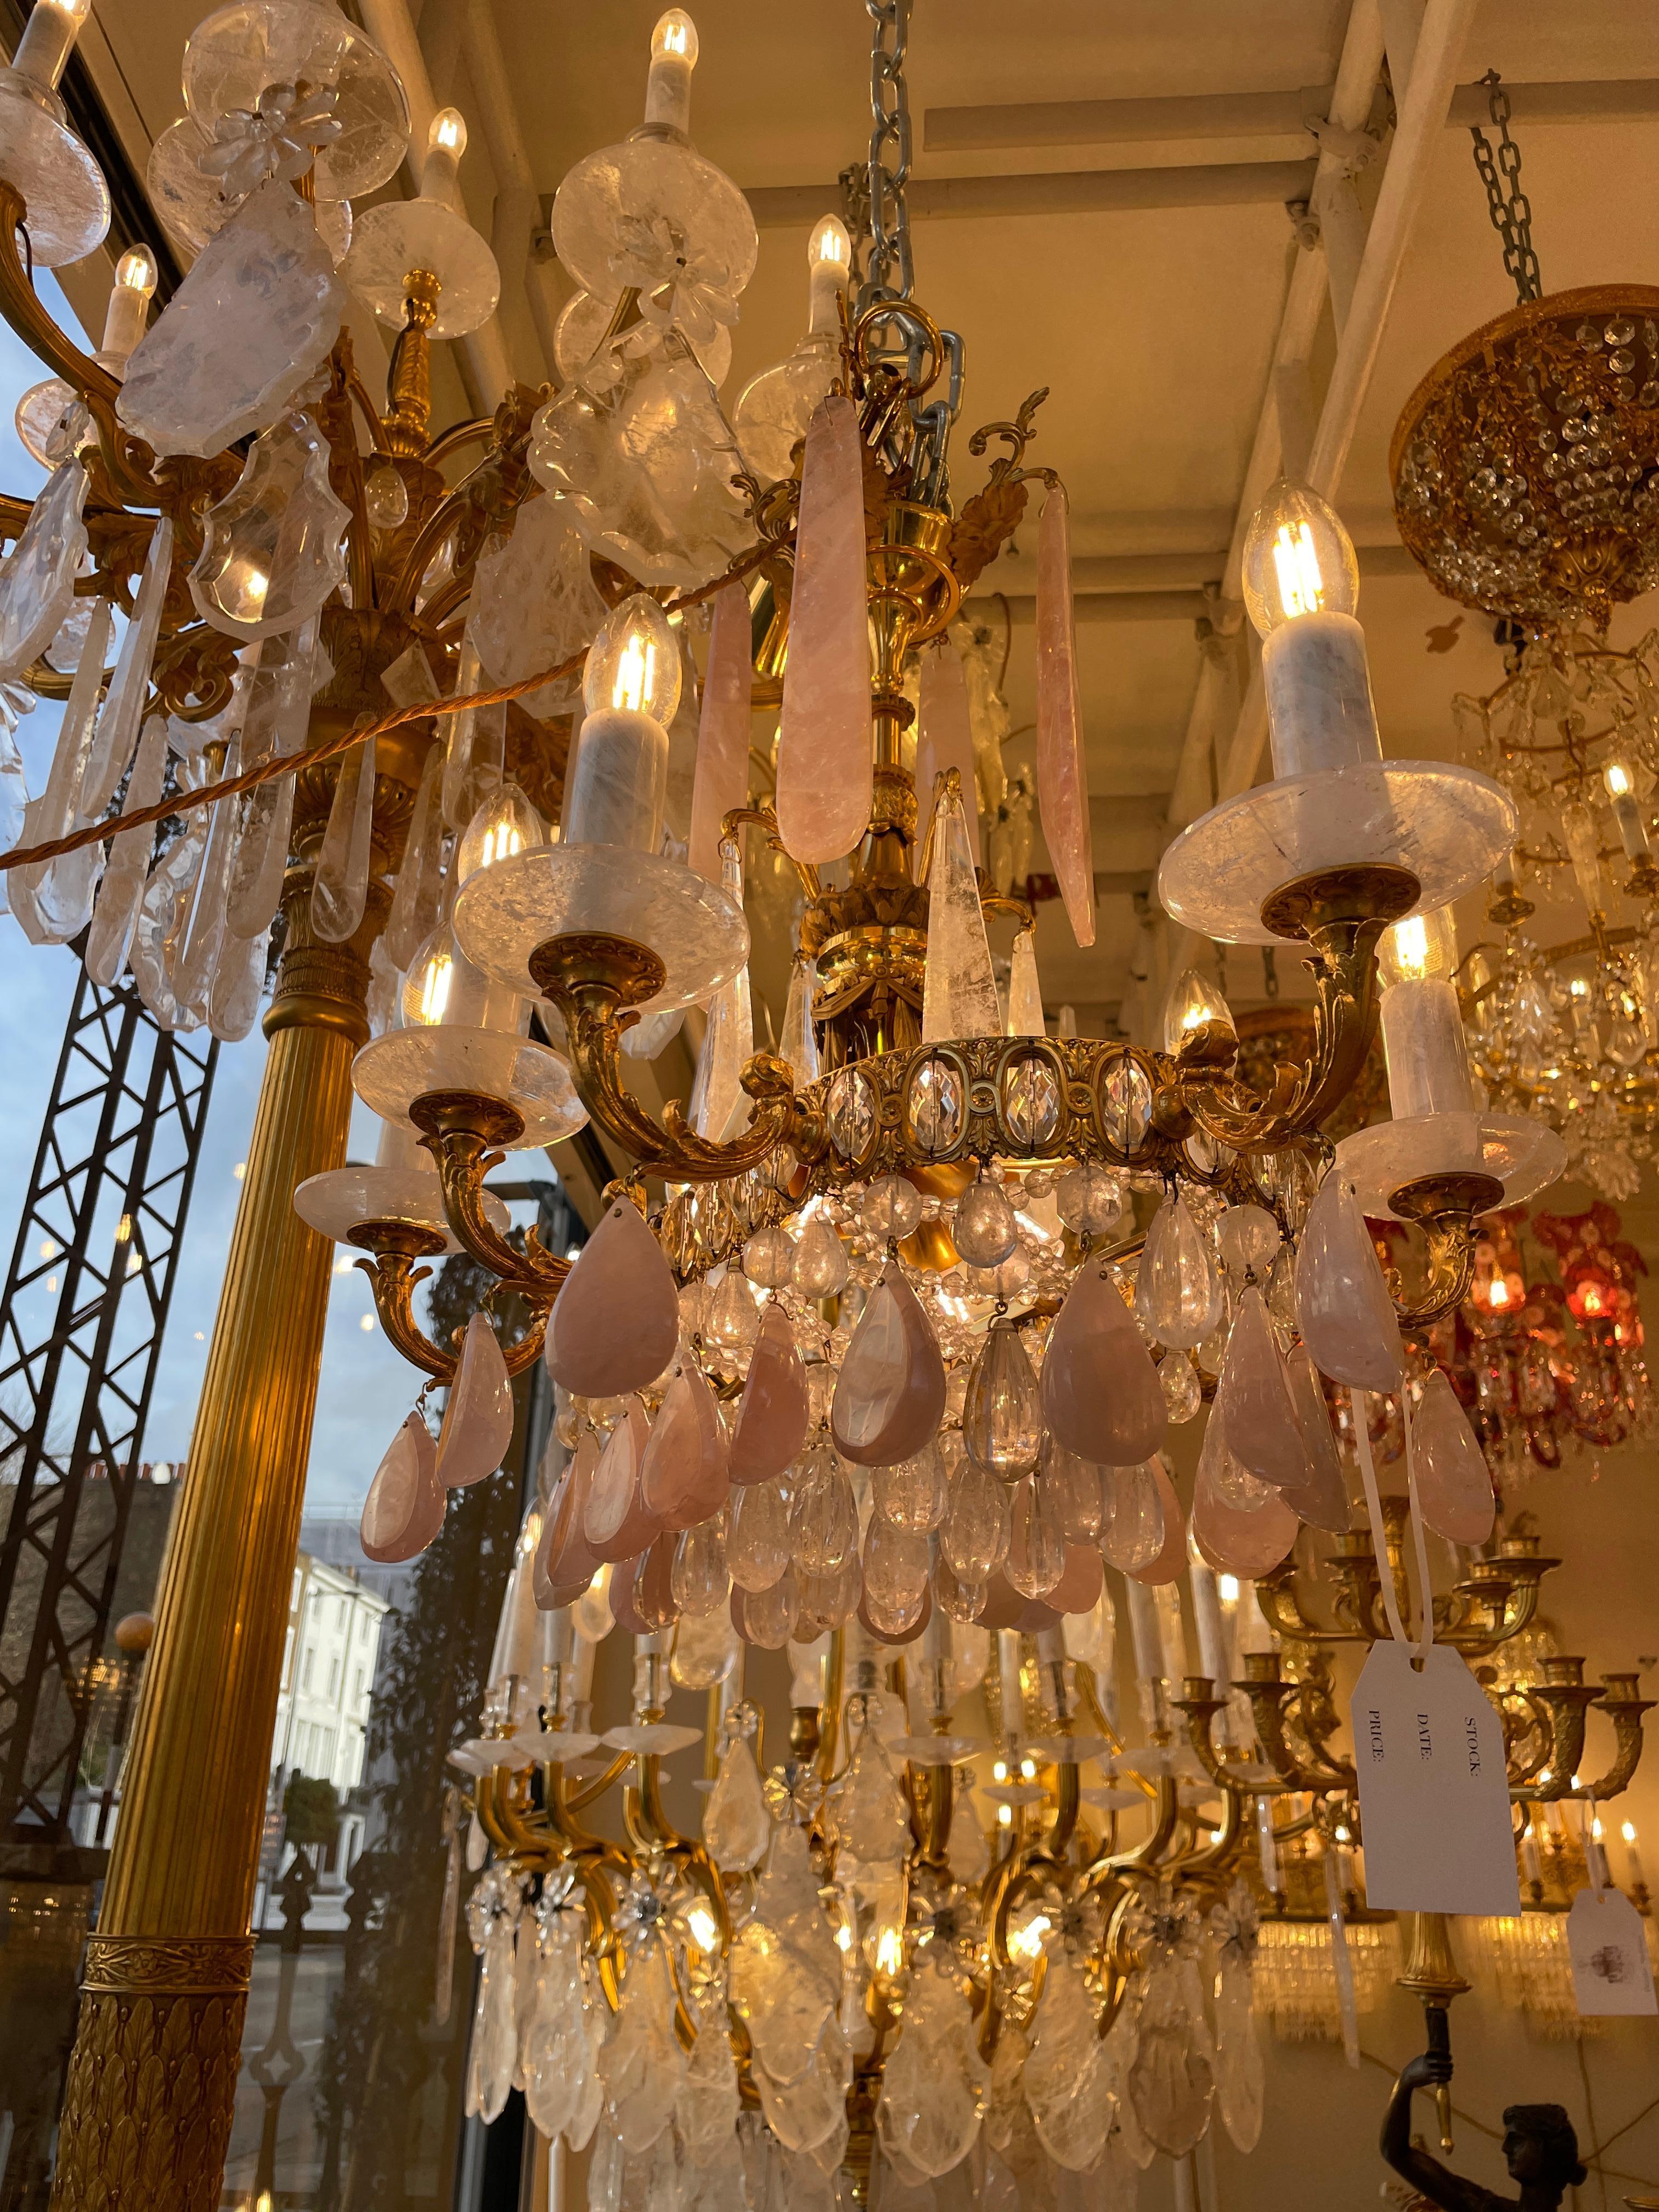 Lovely late 19th century french chandelier. Rare oval shape for the size of chandelier, gilt bronze with roze and clear rock crystals, 8 arms and total 10 lights. rewired to EU standard. We can rewire to US standards for free.